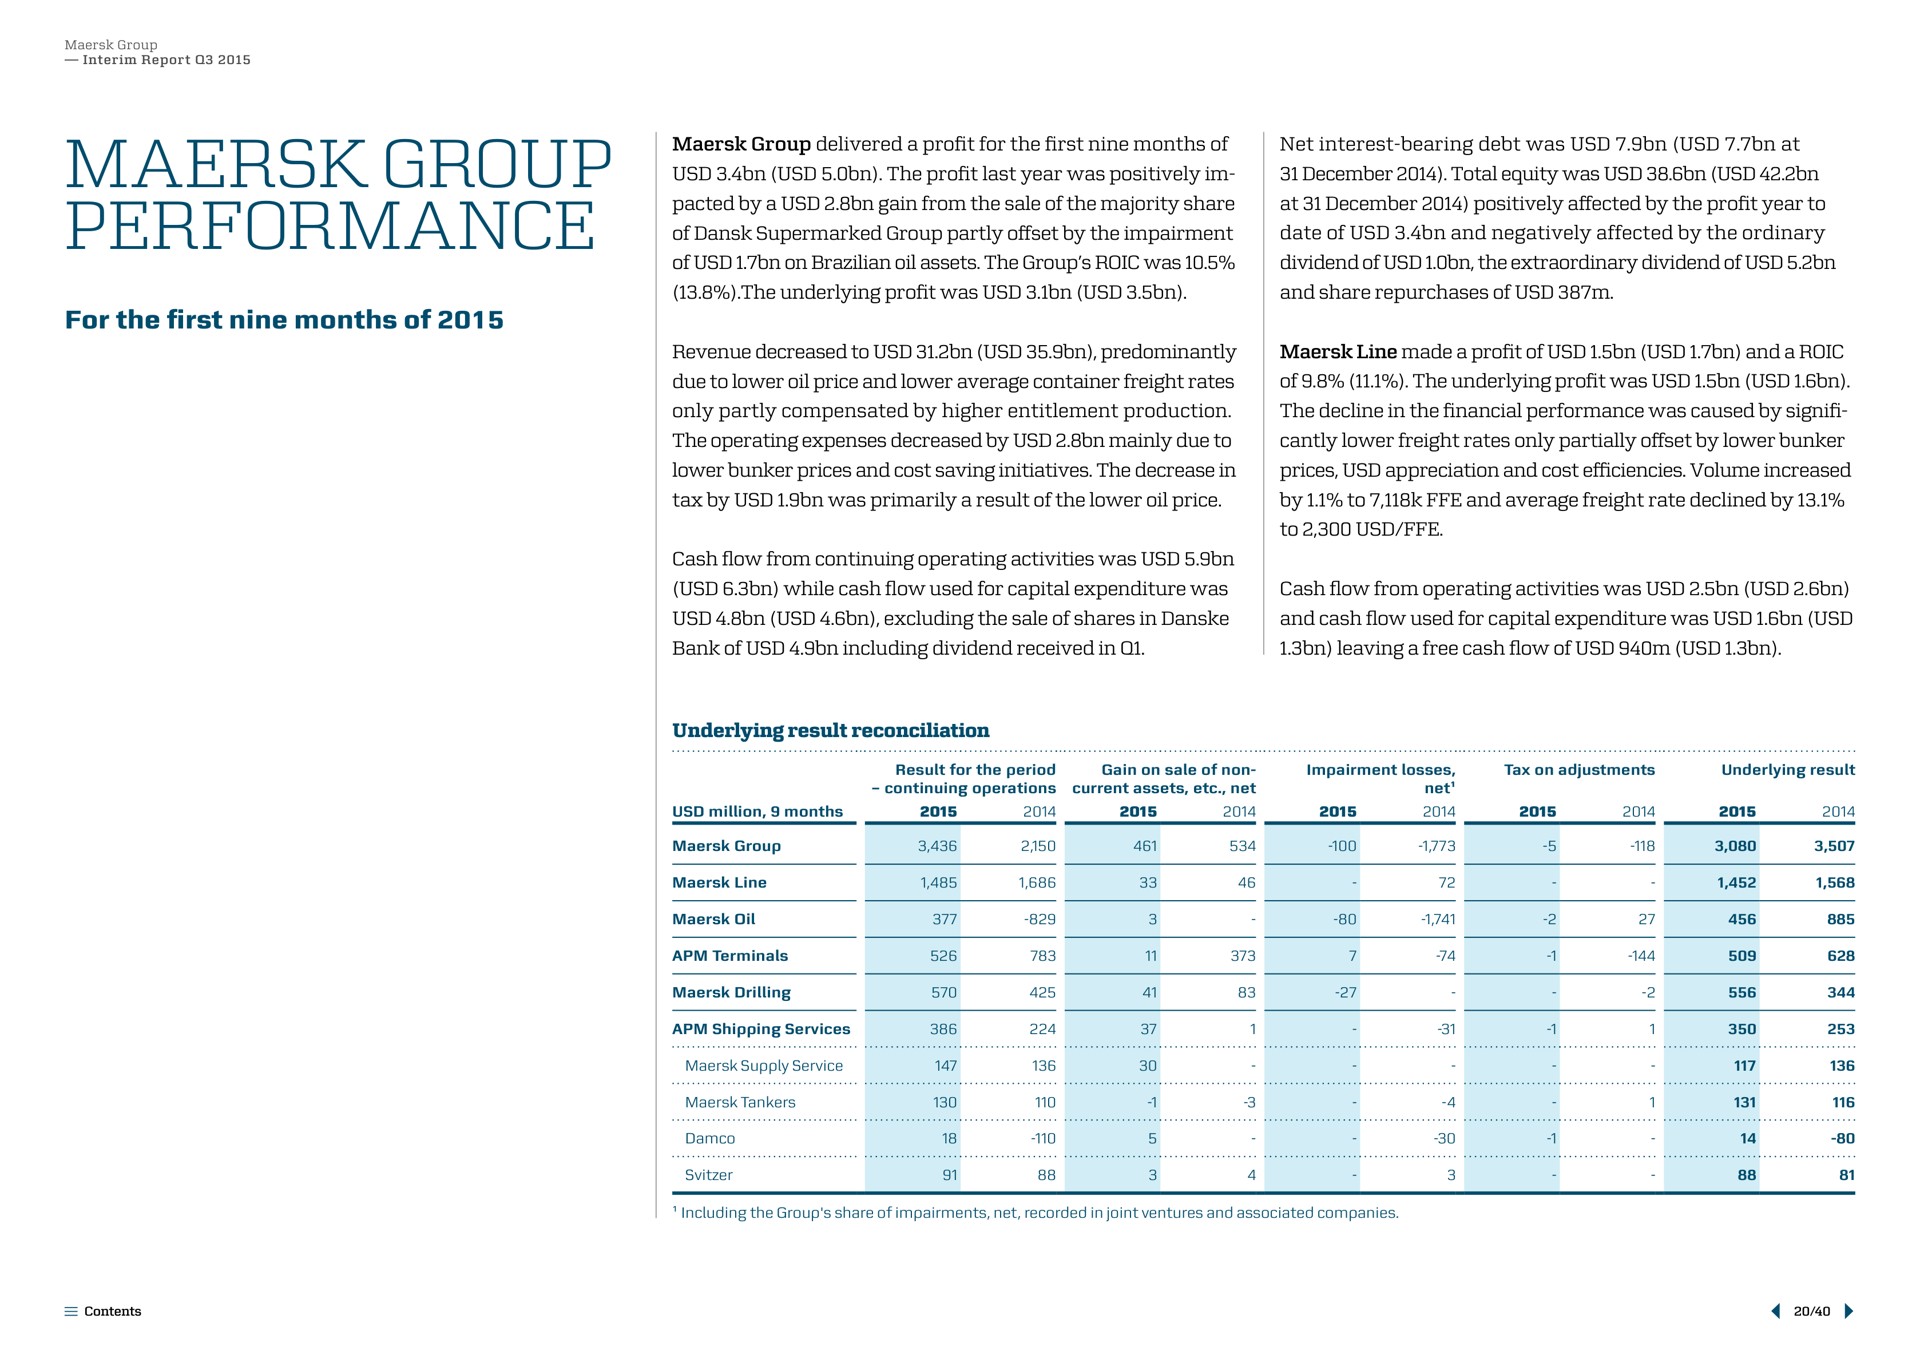 group performance for the first nine months of partly offset by impairment dividend extraordinary dividend due to lower oil price and lower average container freight rates only partly compensated by higher entitlement production decline in financial was caused by lower bunker prices and cost saving initiatives decrease in prices appreciation and cost efficiencies volume increased cash flow from continuing operating activities was and cash flow used capital expenditure was underlying result reconciliation | Maersk